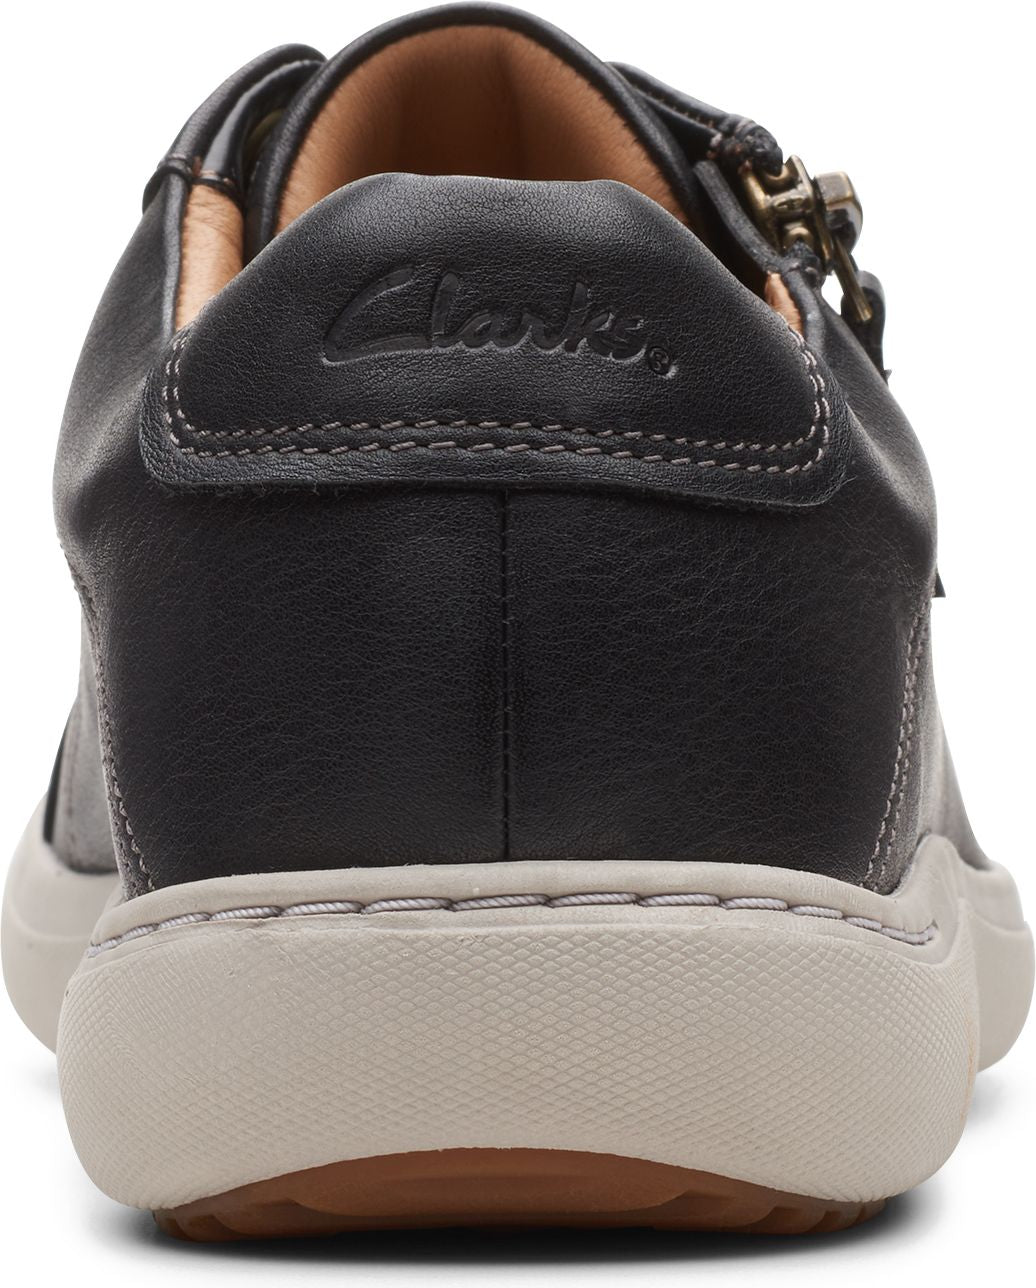 Clarks Shoes Nalle Lace Black Leather